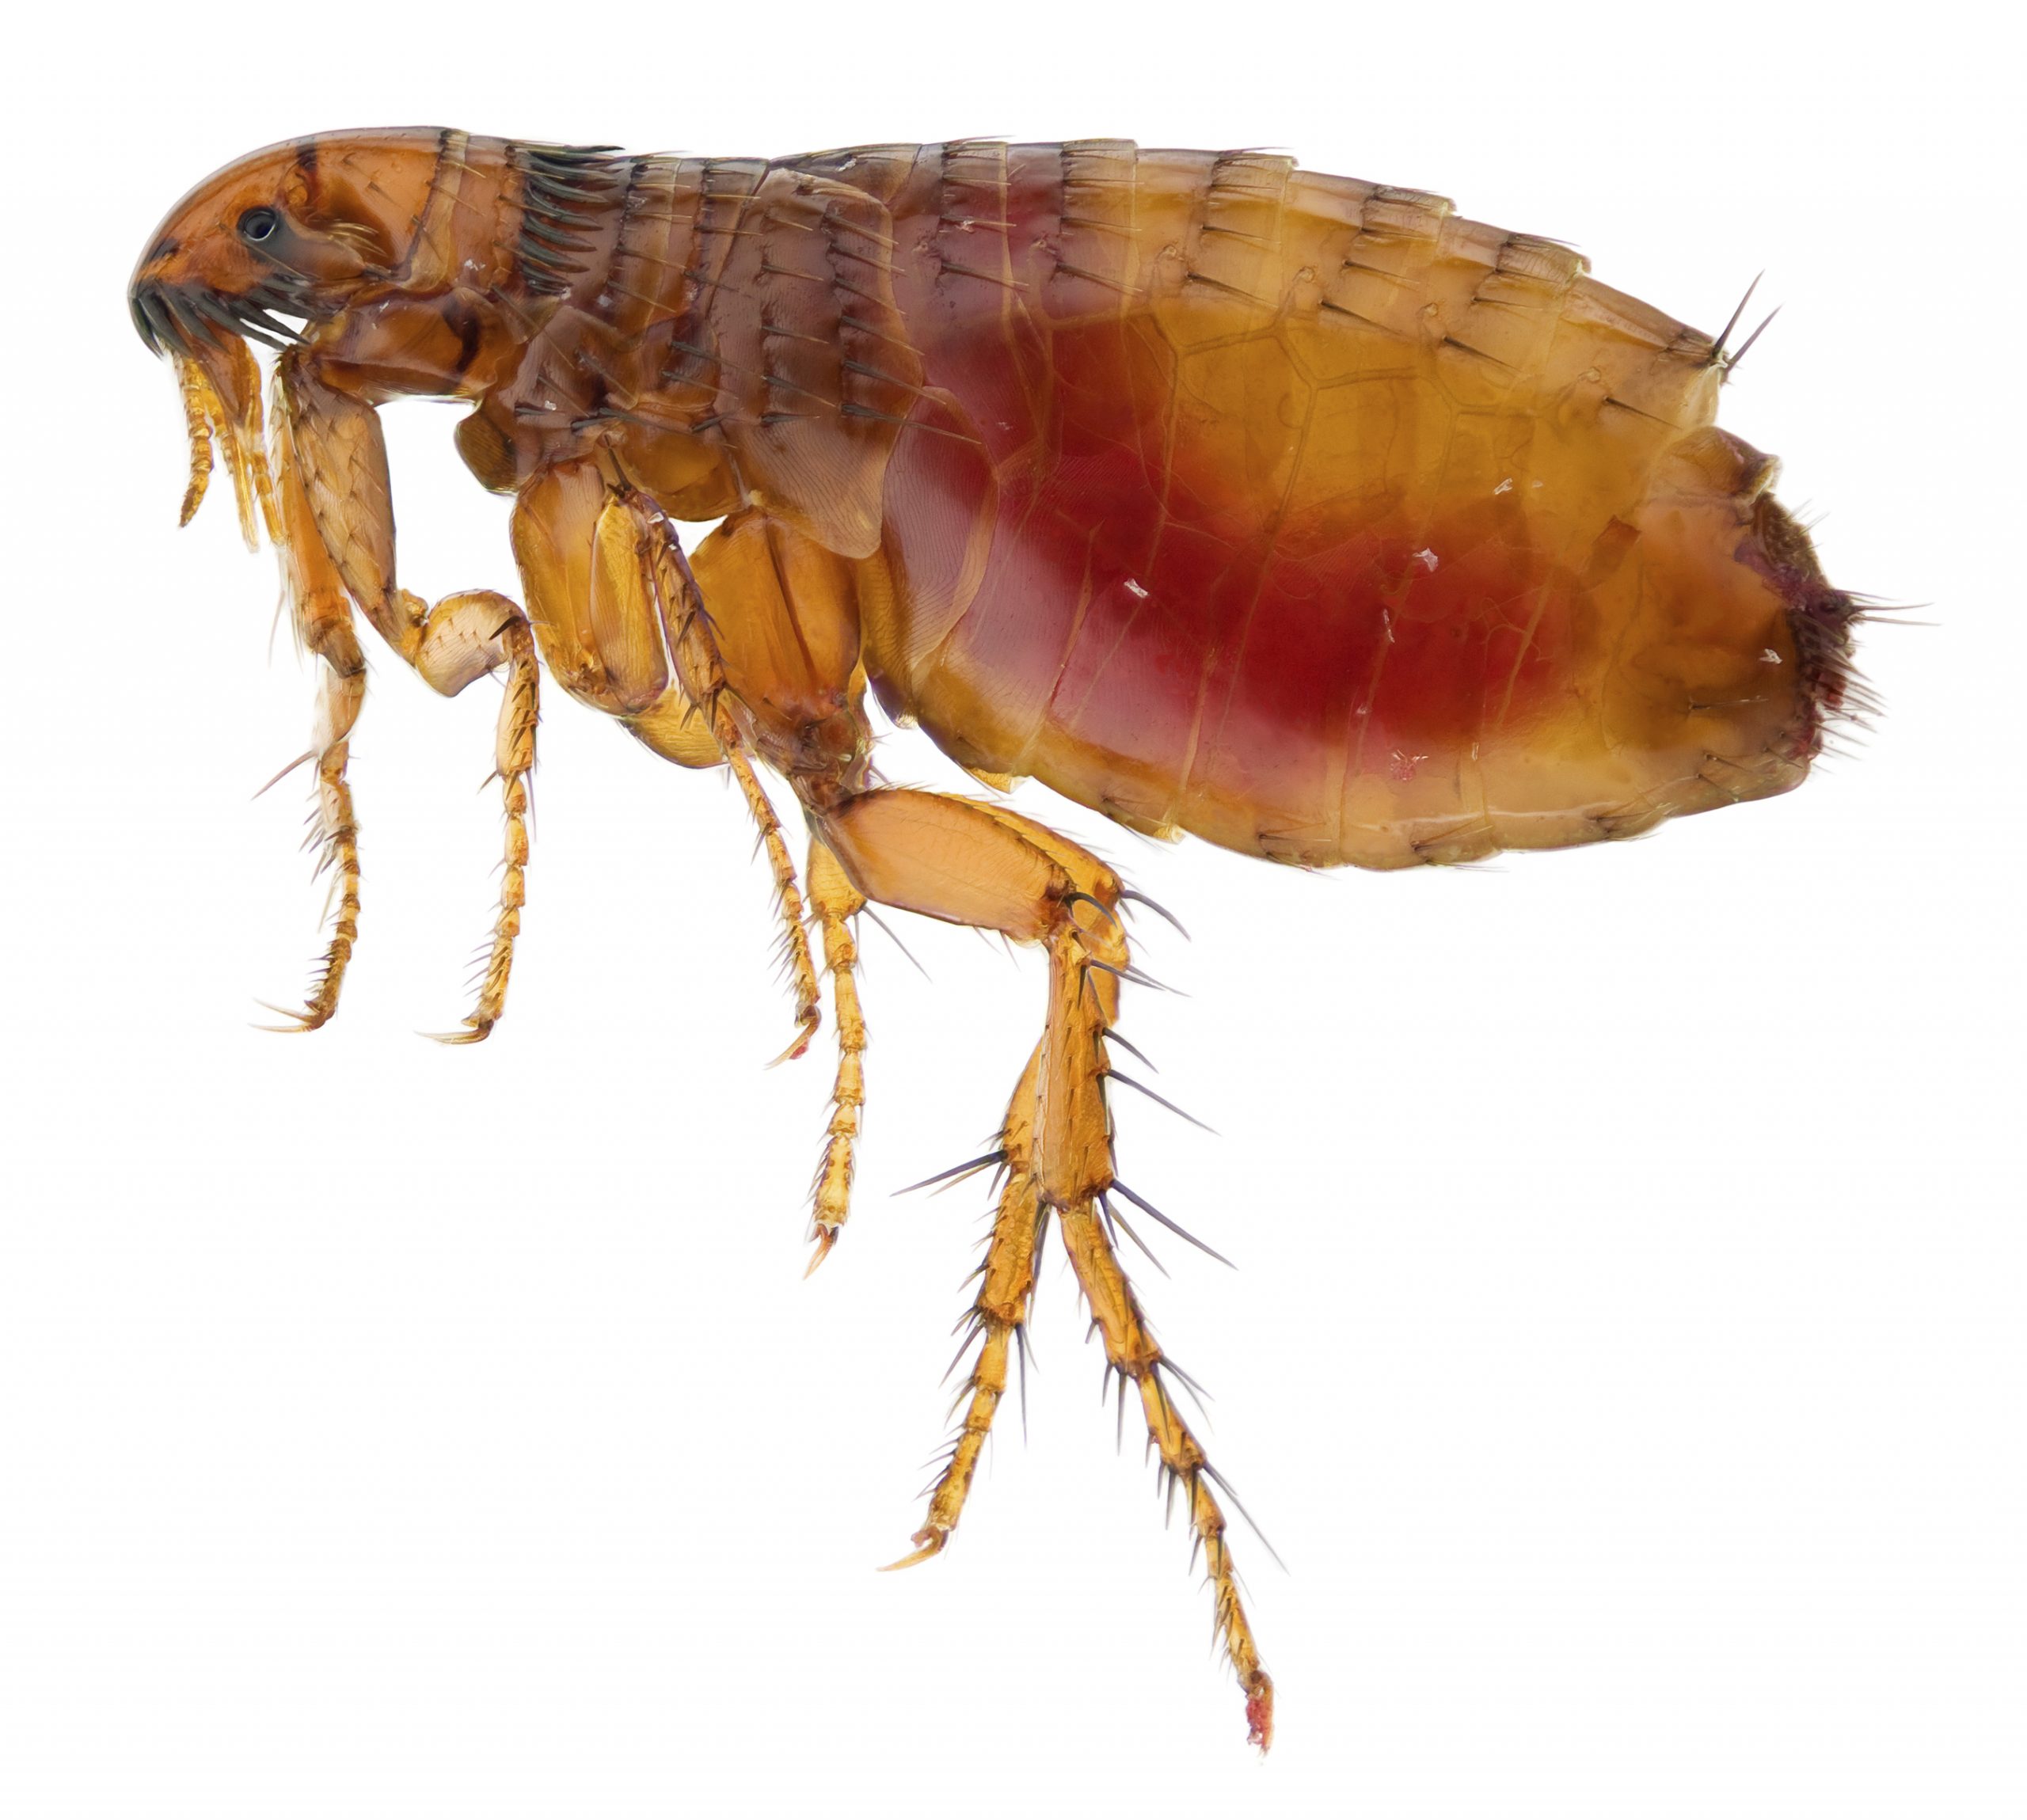 Image of common flea that annoys pets and can ingest houses